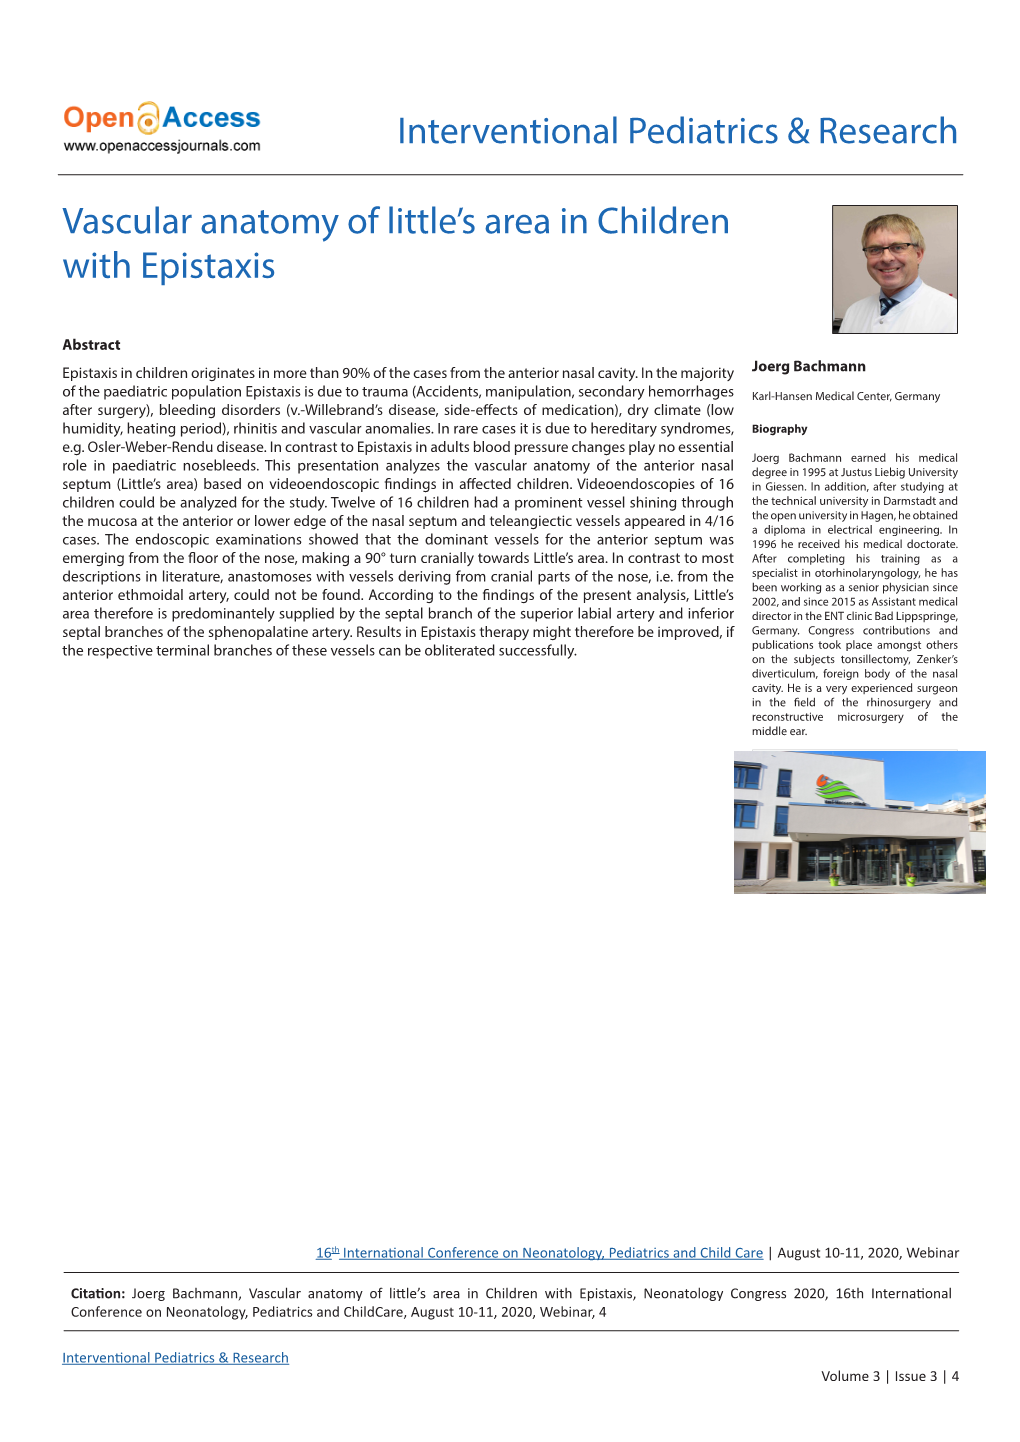 Interventional Pediatrics & Research Vascular Anatomy of Little's Area in Children with Epistaxis